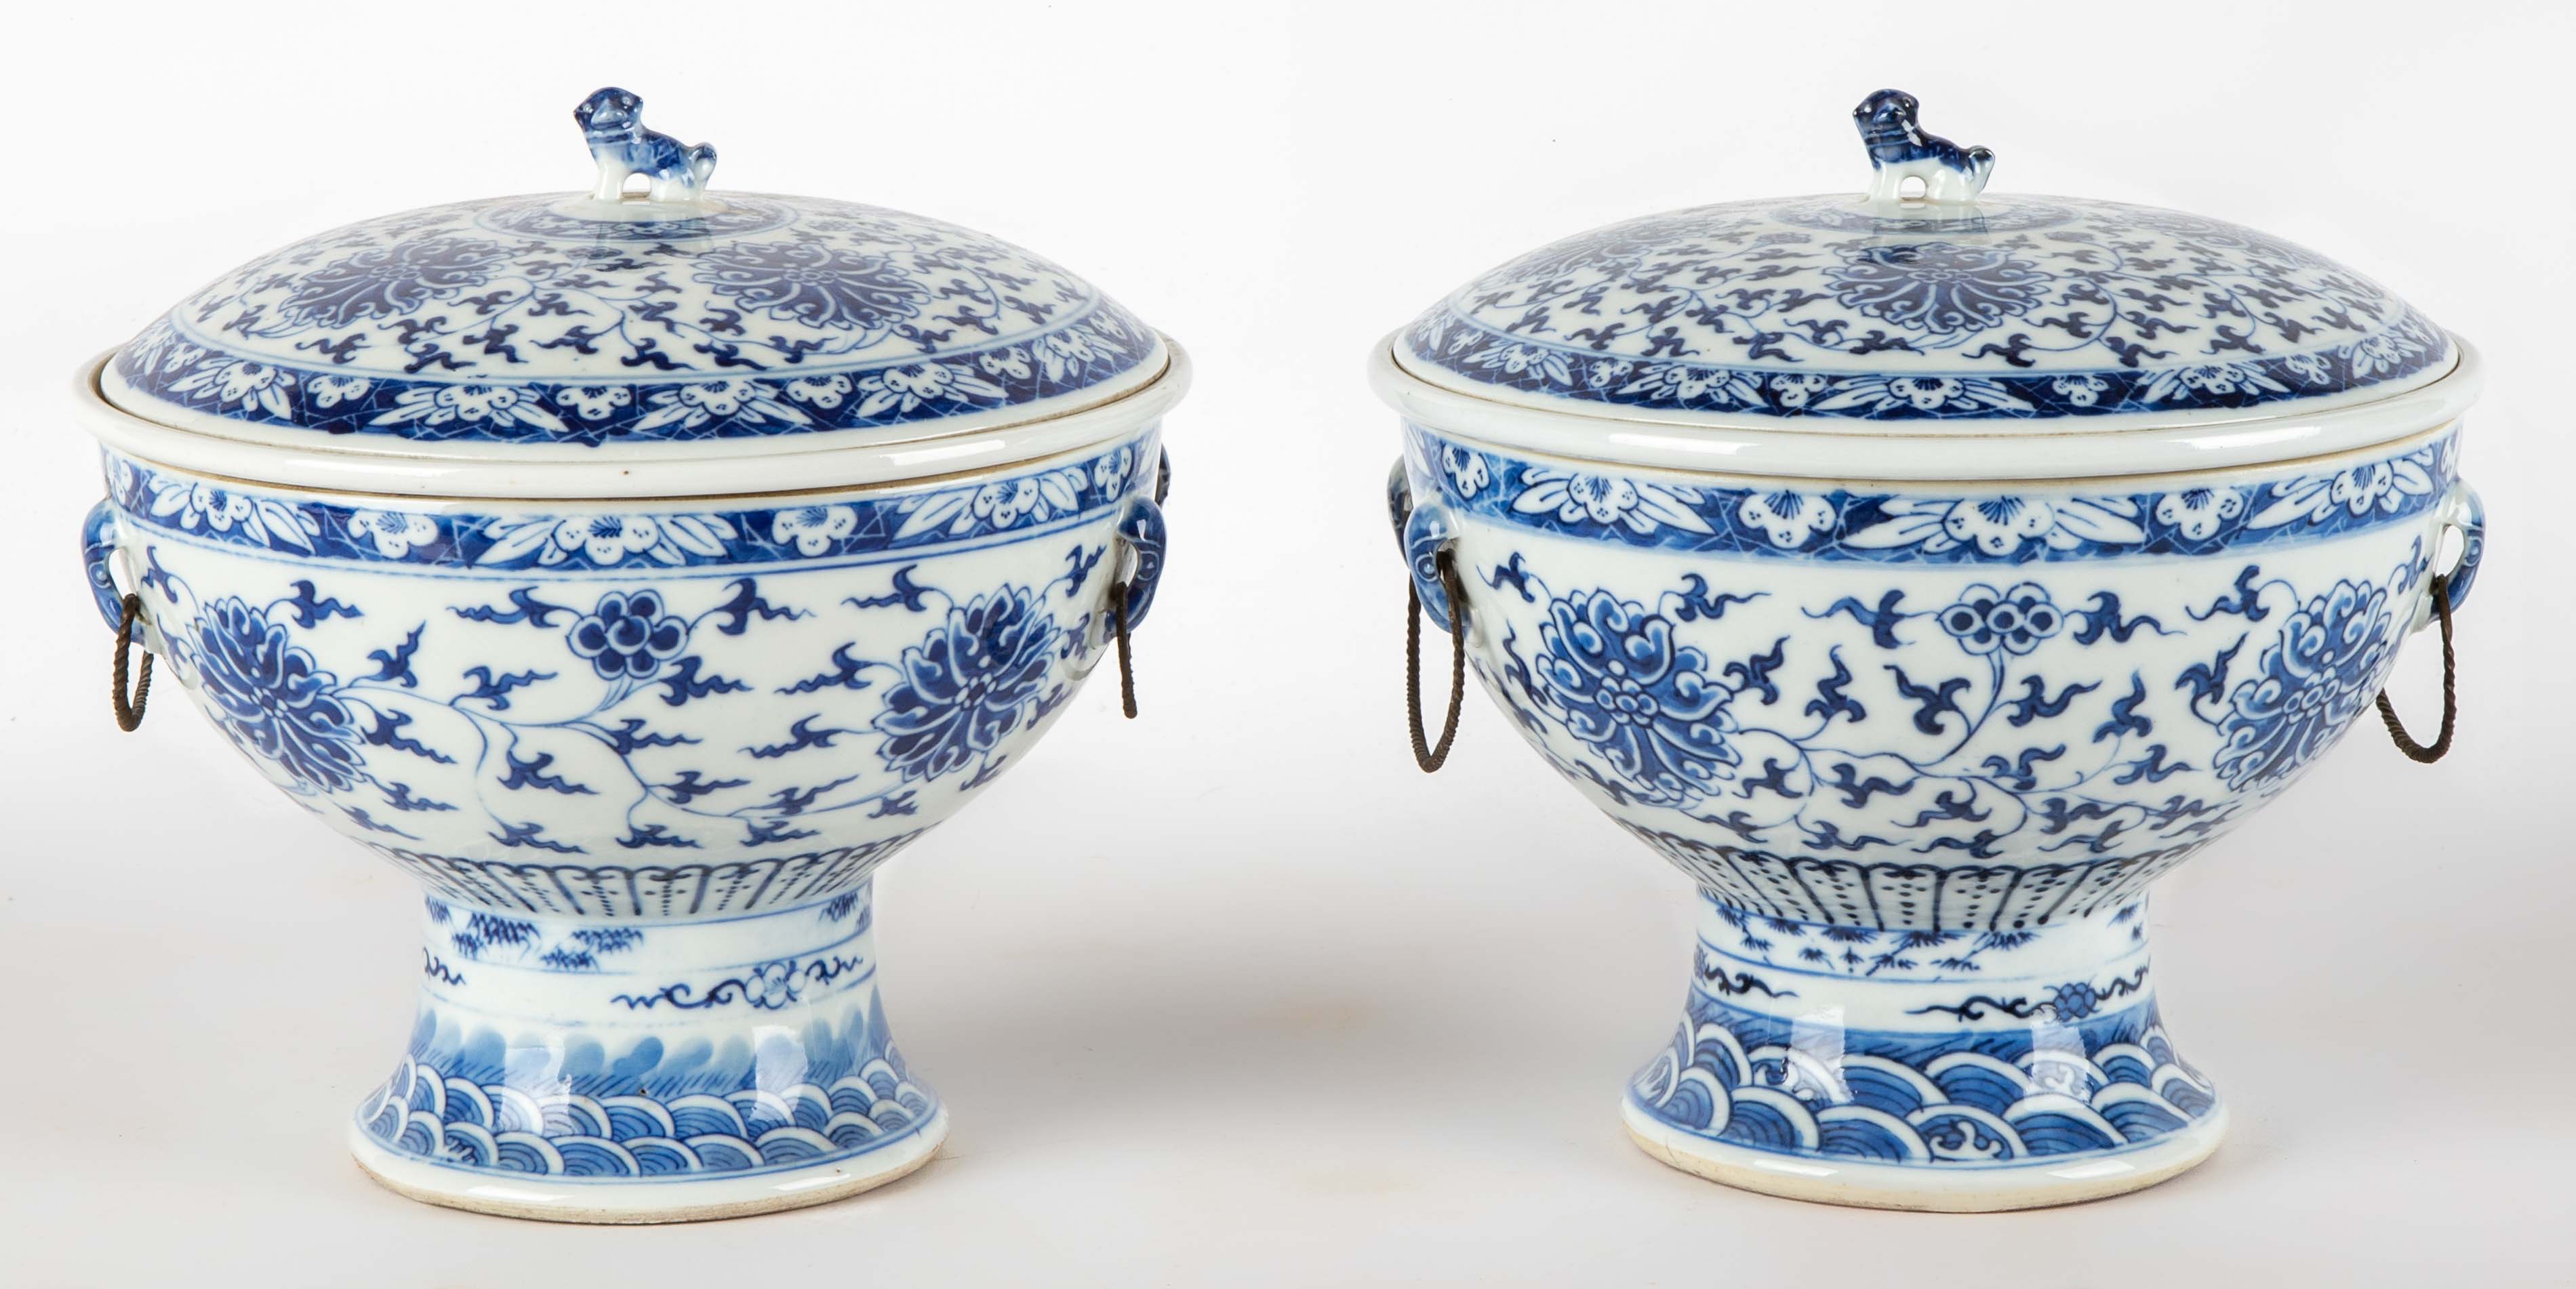 PAIR OF CHINESE BLUE AND WHITE PORCELAIN